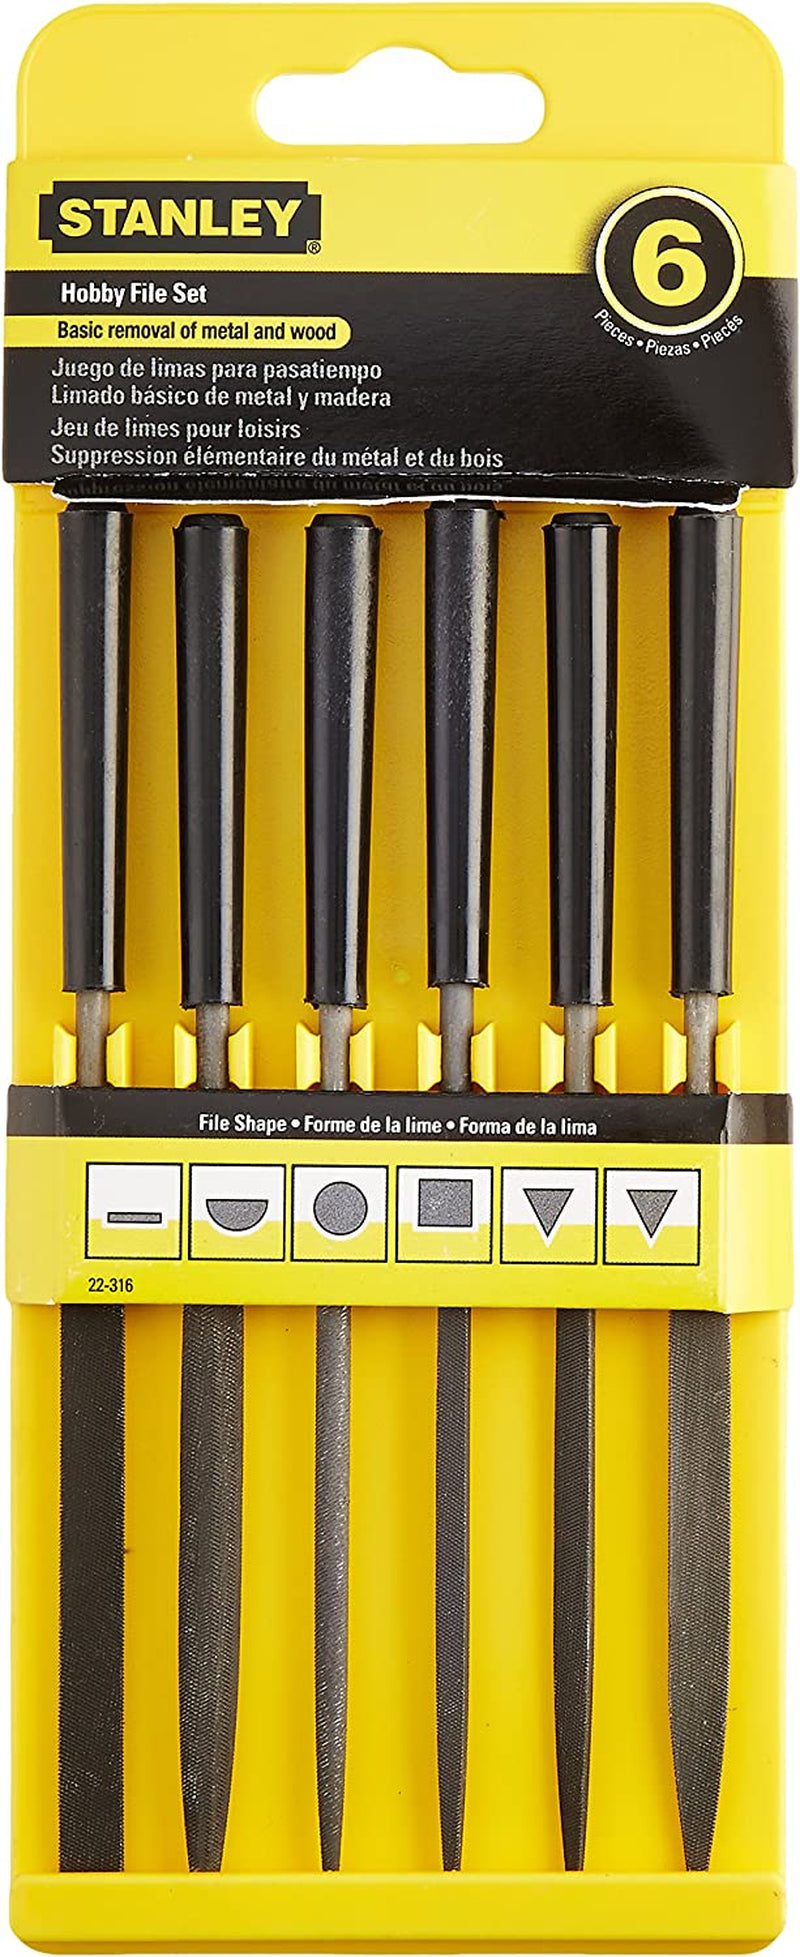 STANLEY 5-1/2-Inch Hobby File Set, 6-Pack